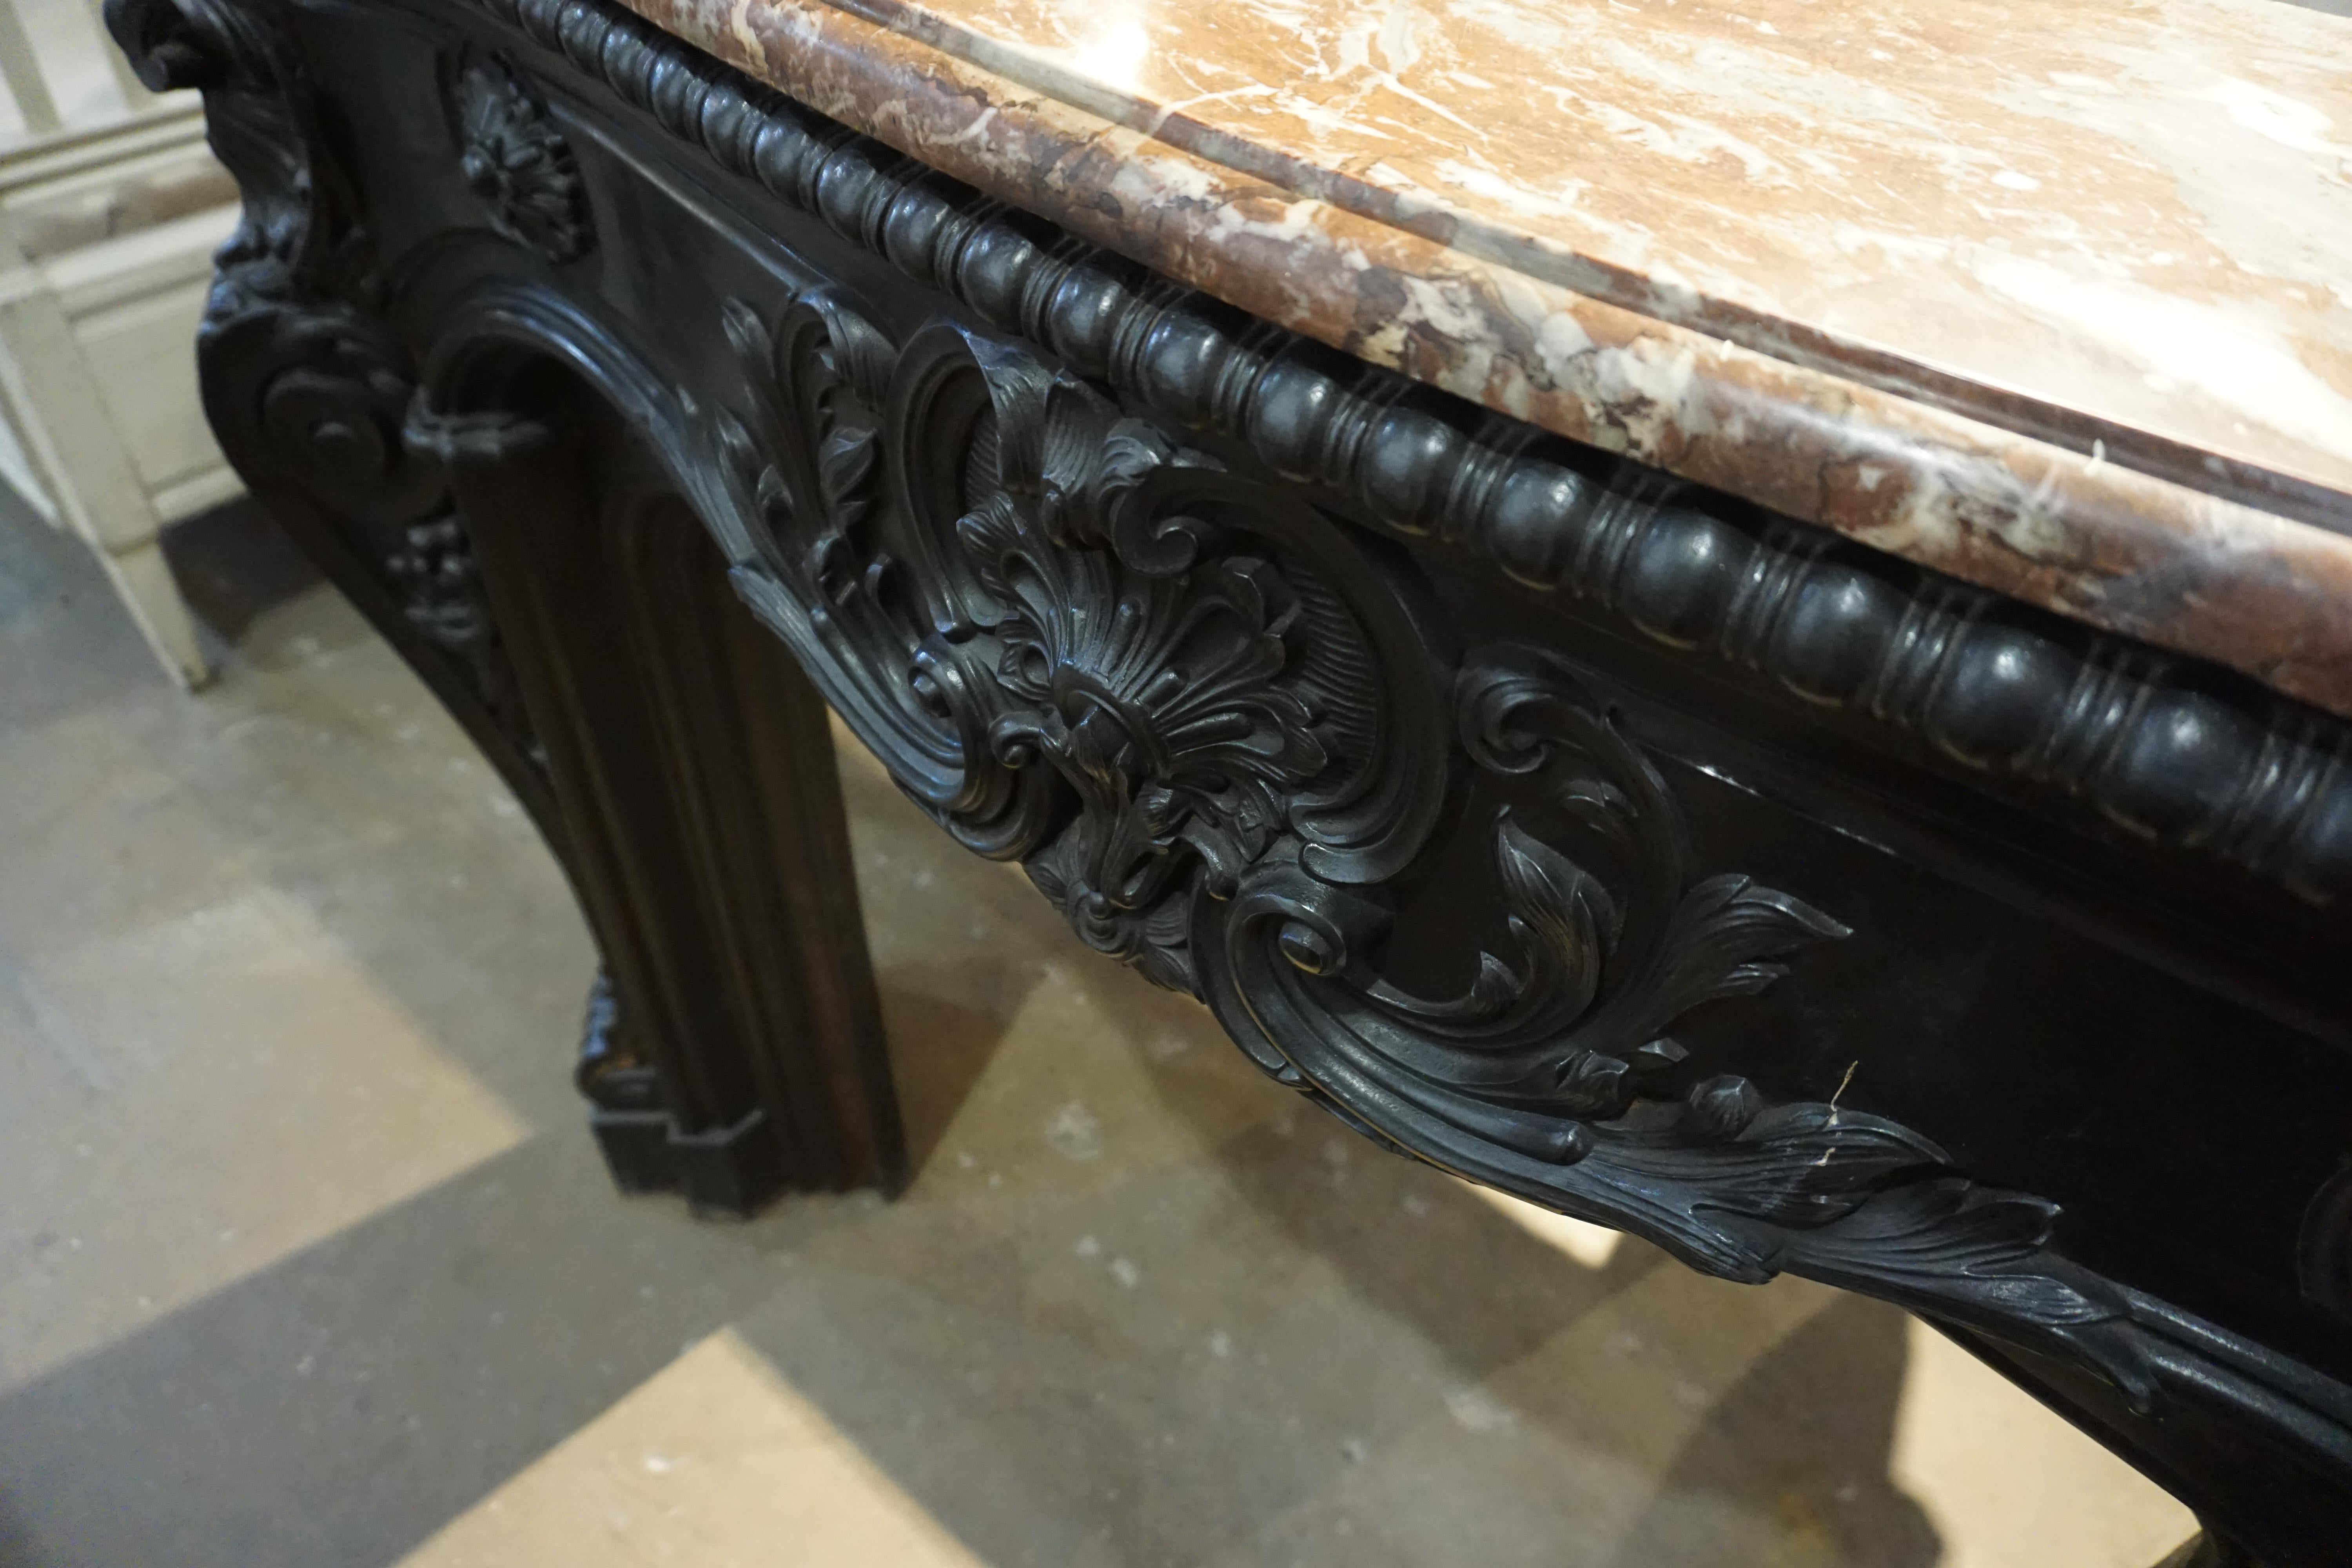 A unique mantel piece made of iron and marble. Originates from France circa the 1700s.

Measurements: 46'' W x 10.5'' D x 40'' H.